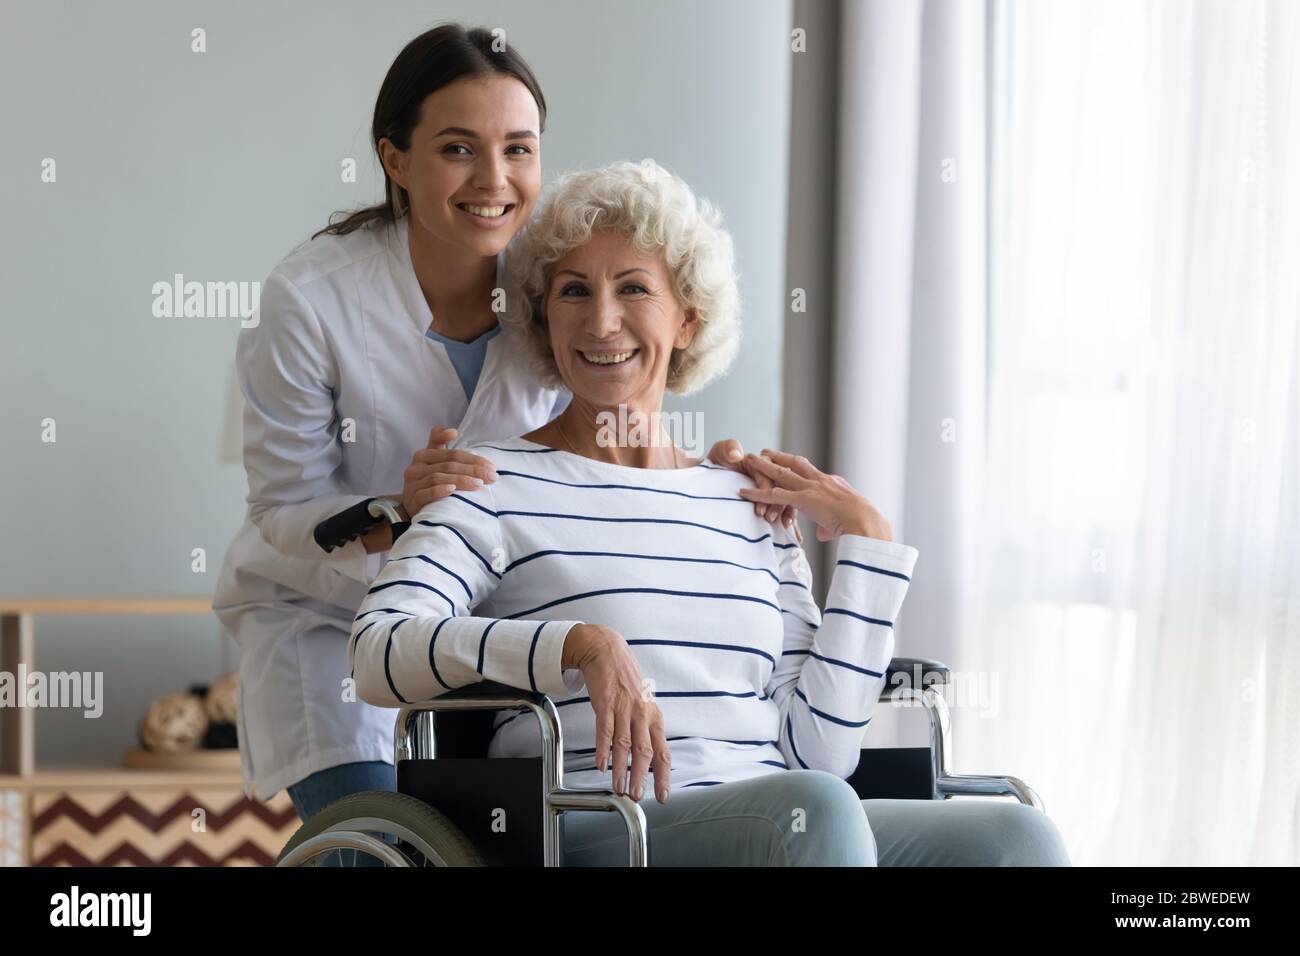 Portrait of satisfied elderly patient in wheelchair and caring caregiver Stock Photo